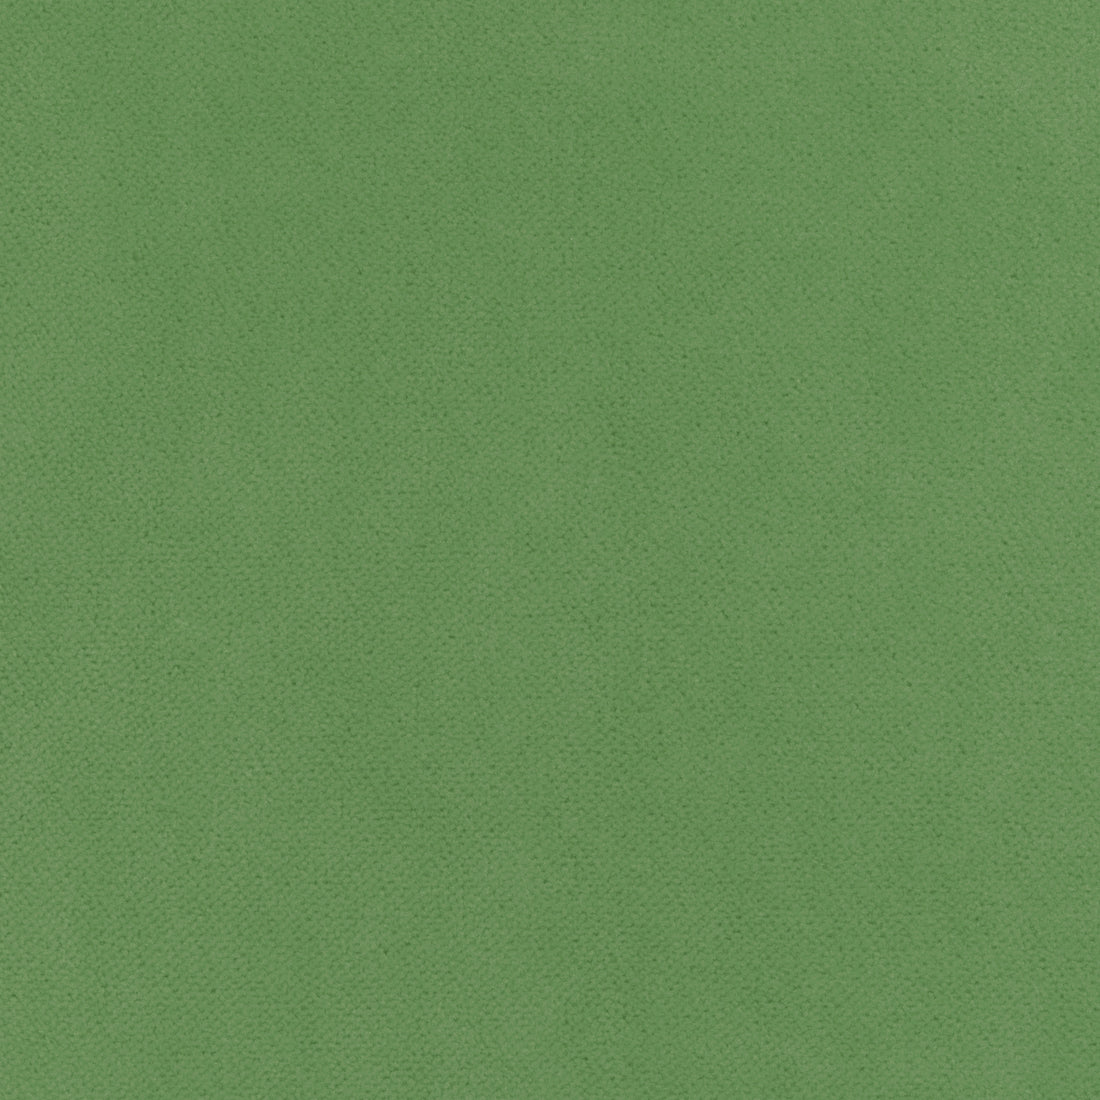 Club Velvet fabric in grass color - pattern number W7254 - by Thibaut in the Club Velvet collection